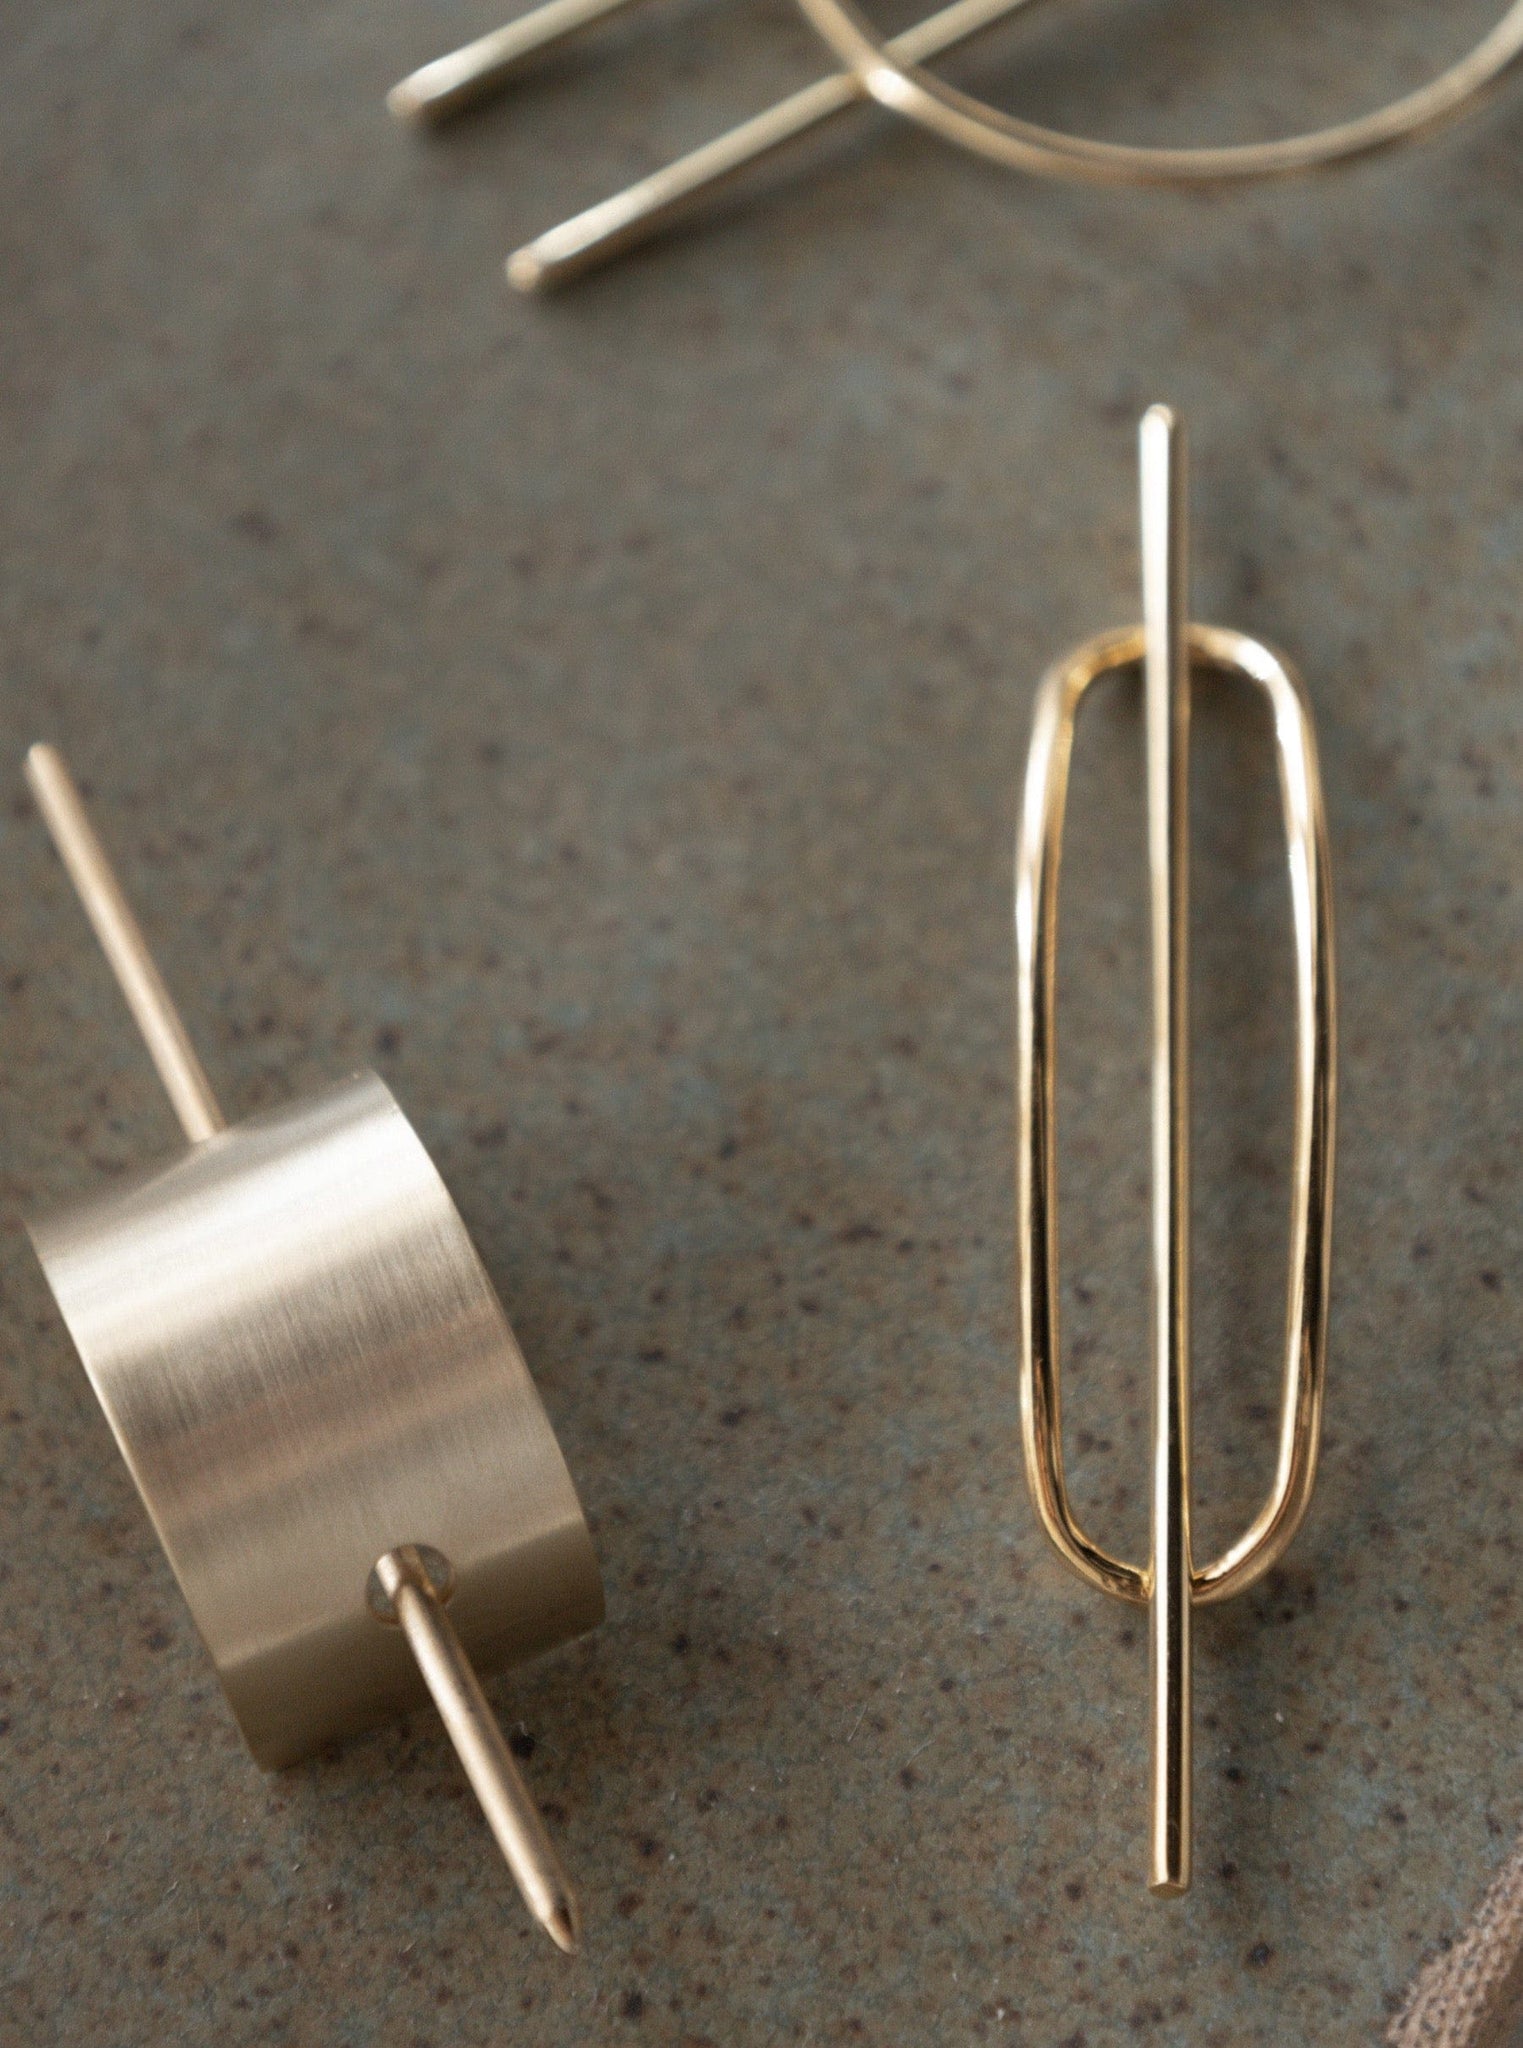 A pair of gold plated earrings with a Brushed Arch Hair Pin design on a table.